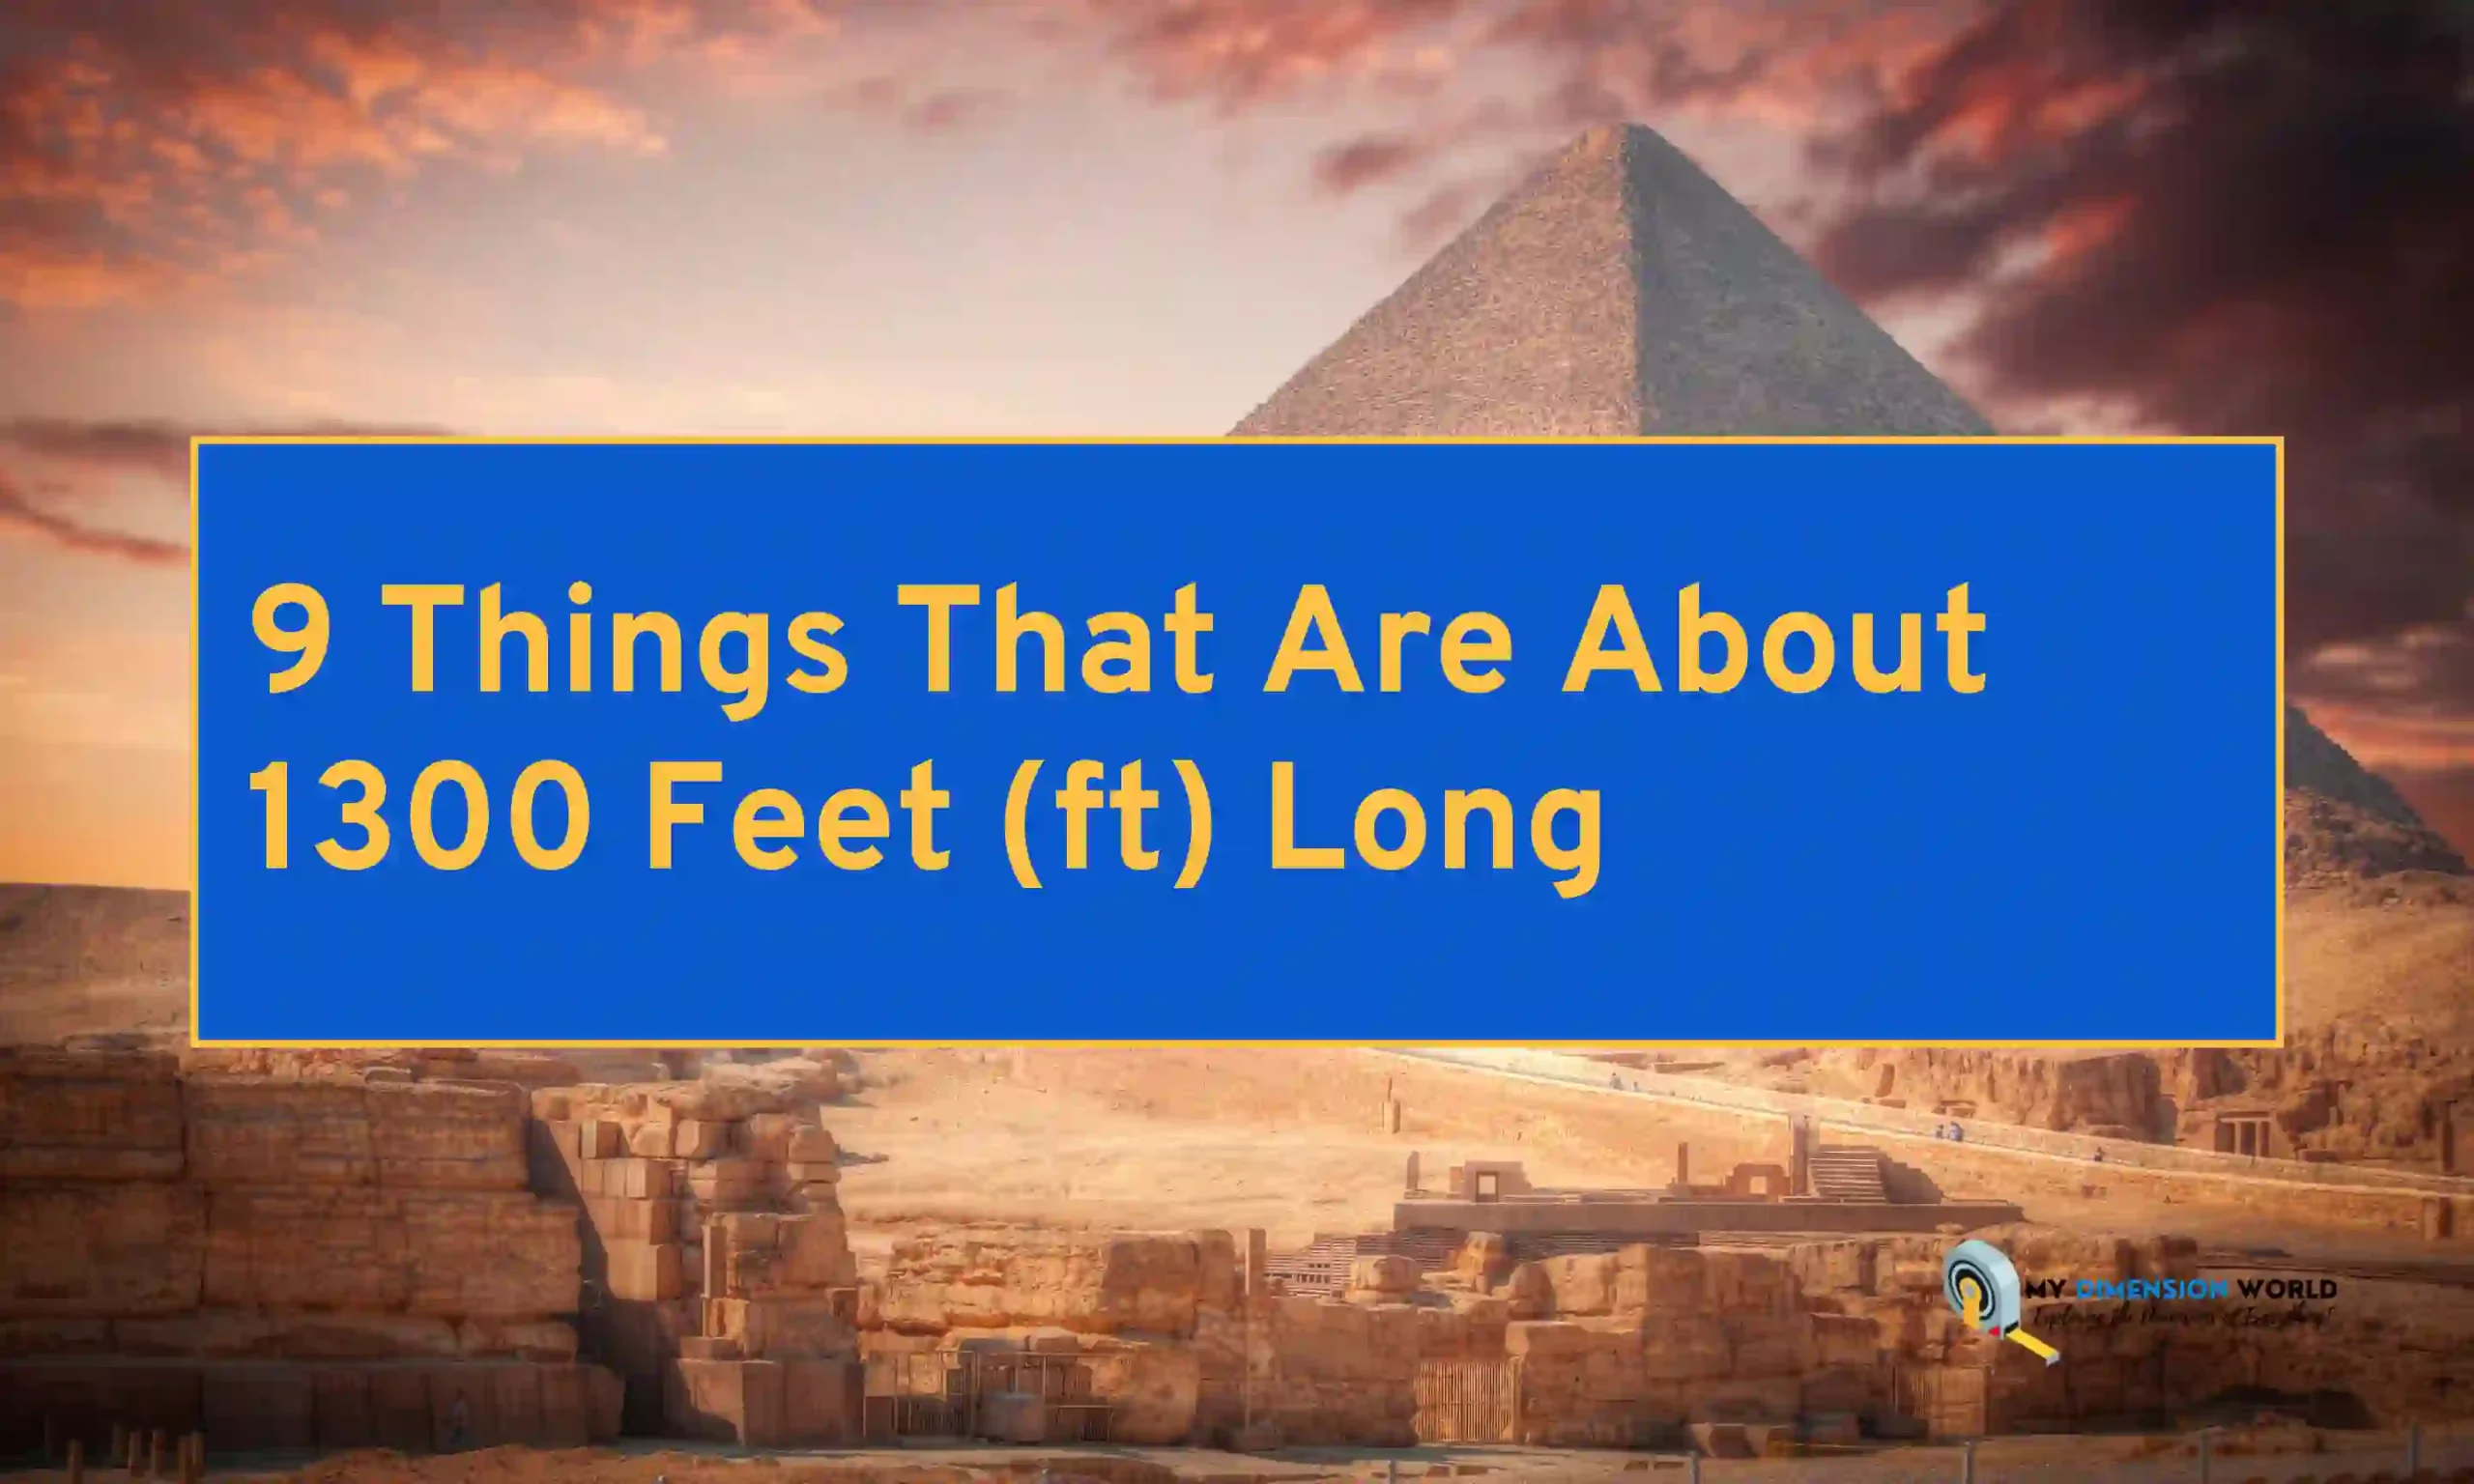 9 Things That Are About 1300 Feet (ft) Long